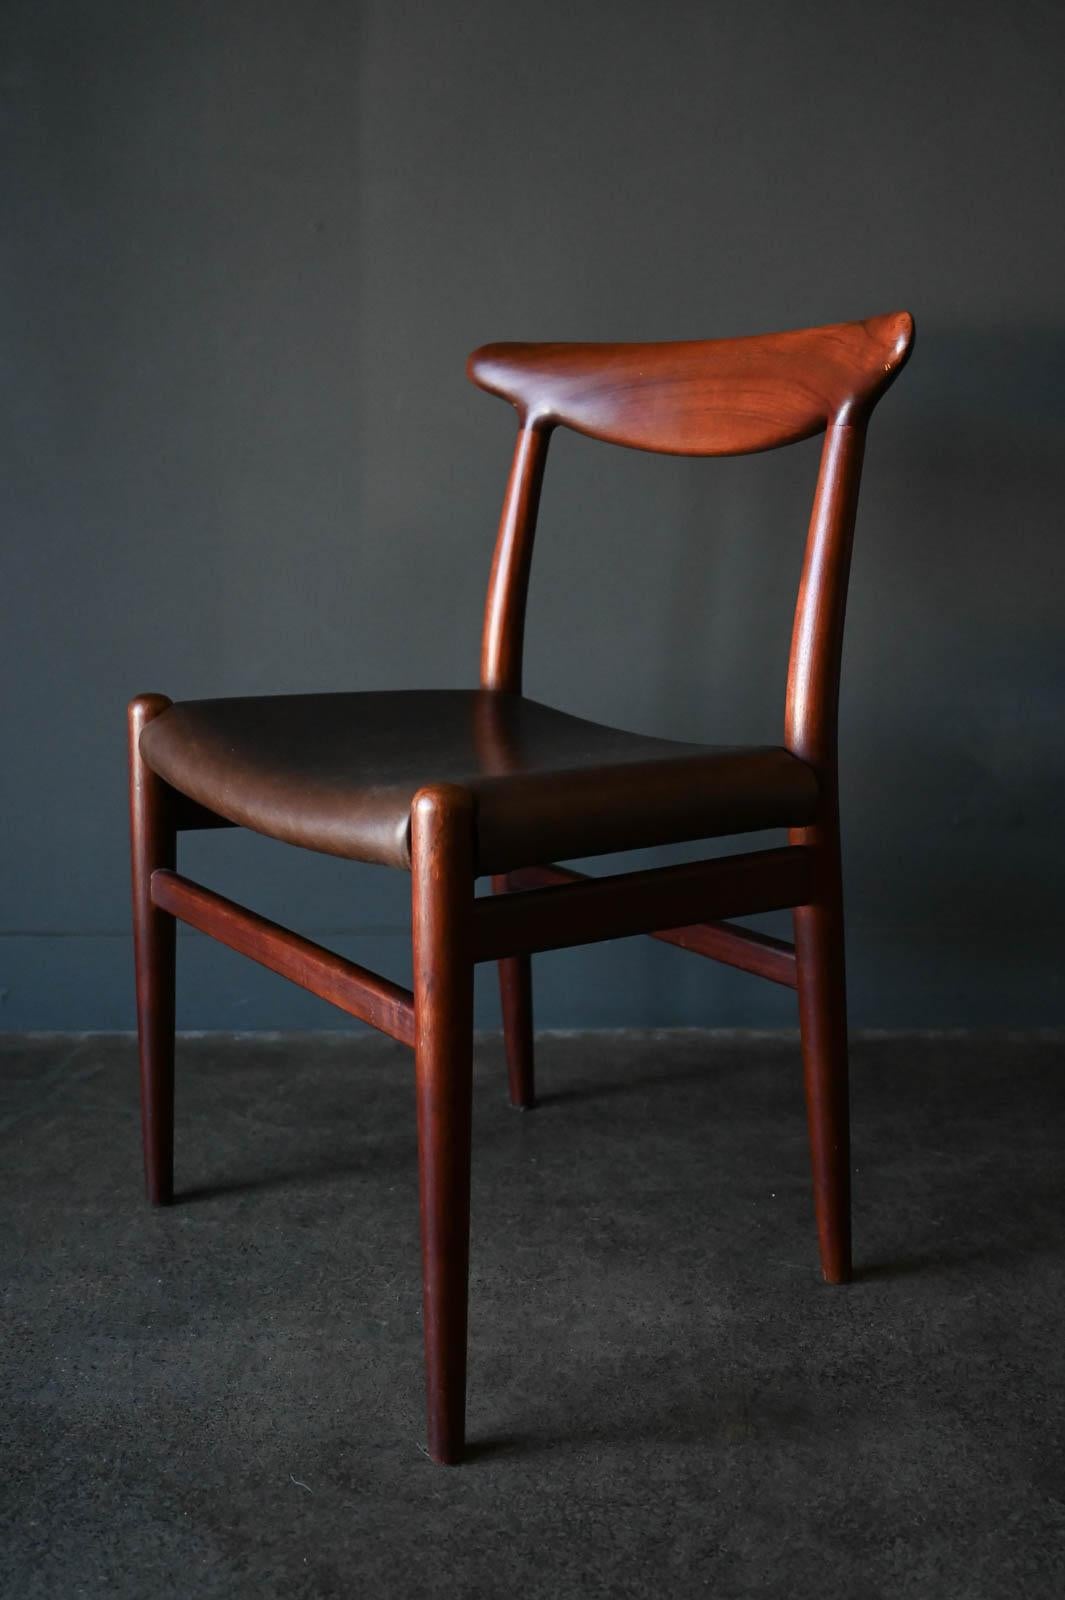 Hans Wegner W2 dining or side chair, ca. 1960. Original vintage side or desk chair with new leather seat. Teak frame in very good original condition, with only sight wear.

Measures 22